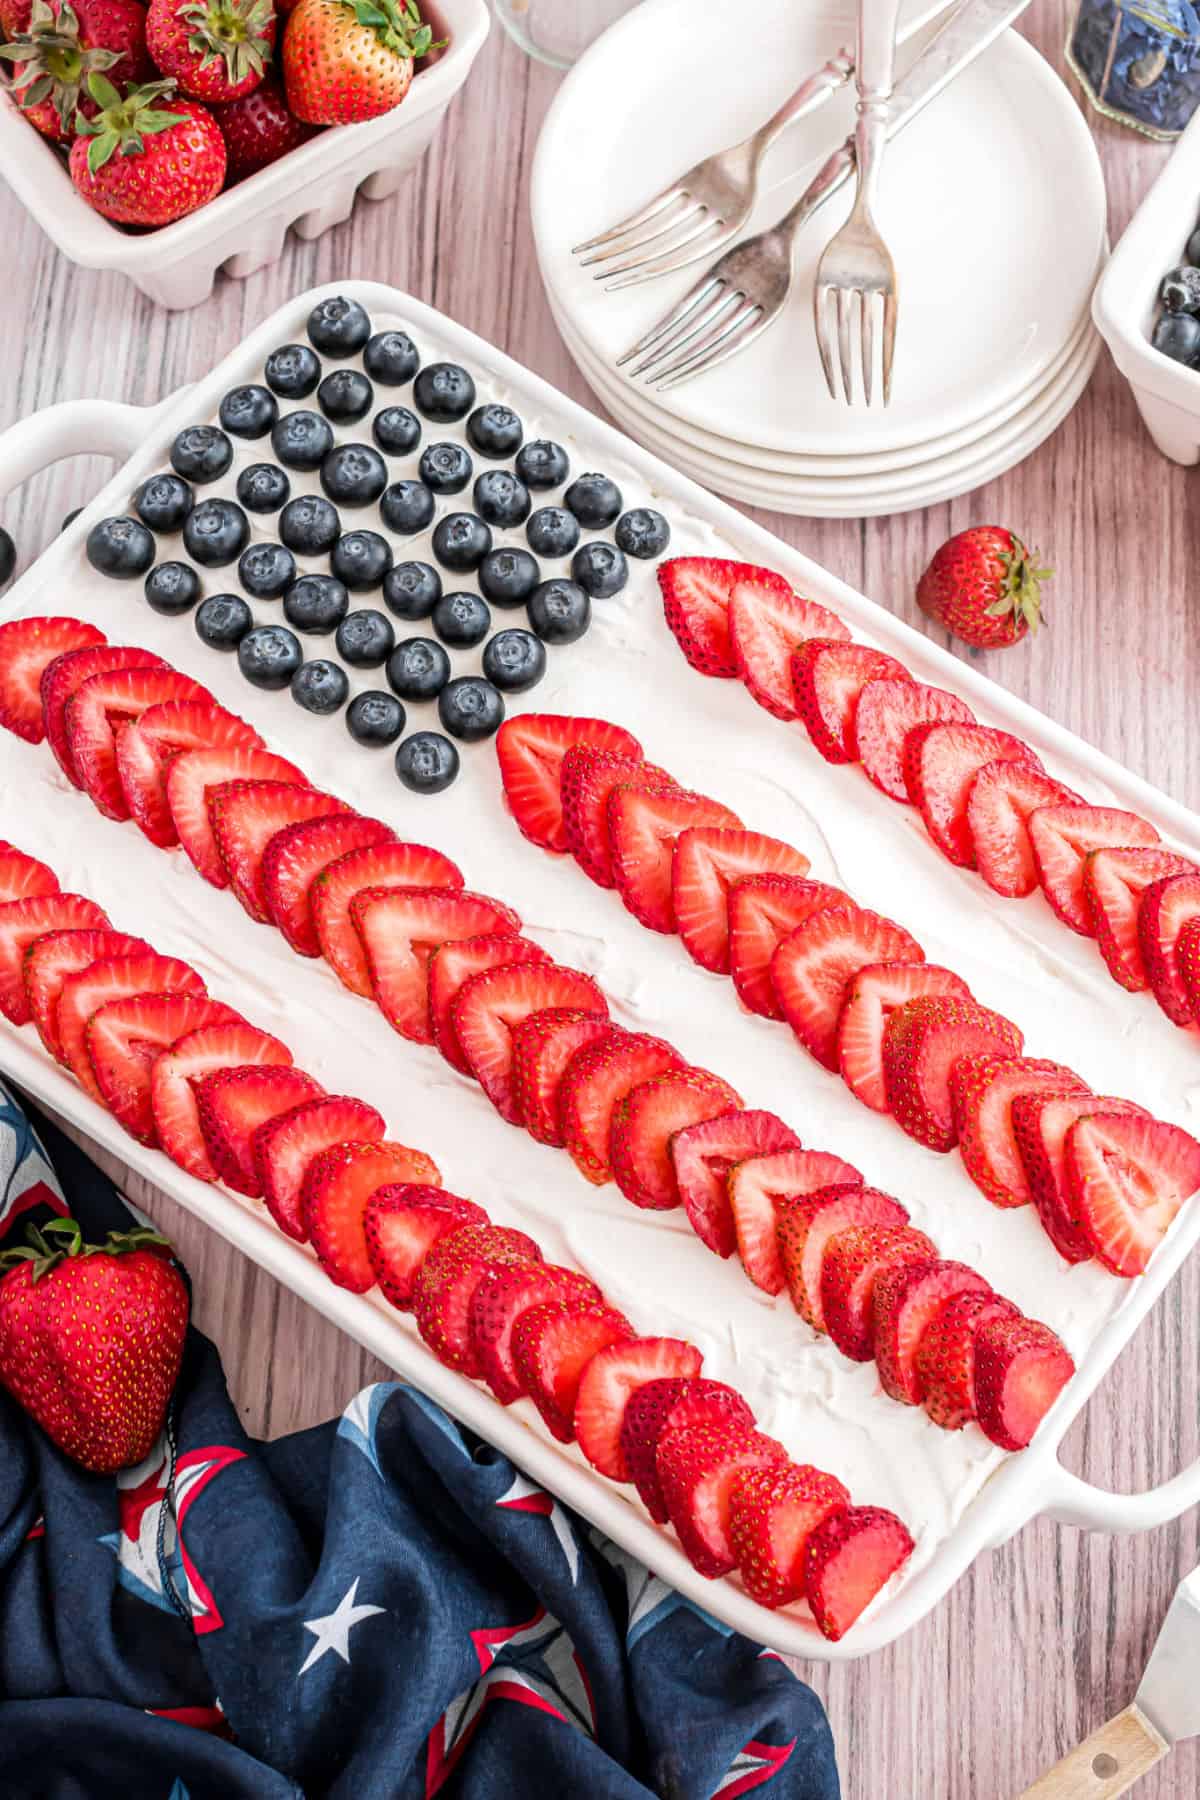 Red white and blue flag cake using whipped cream, blueberries, and strawberry slices.